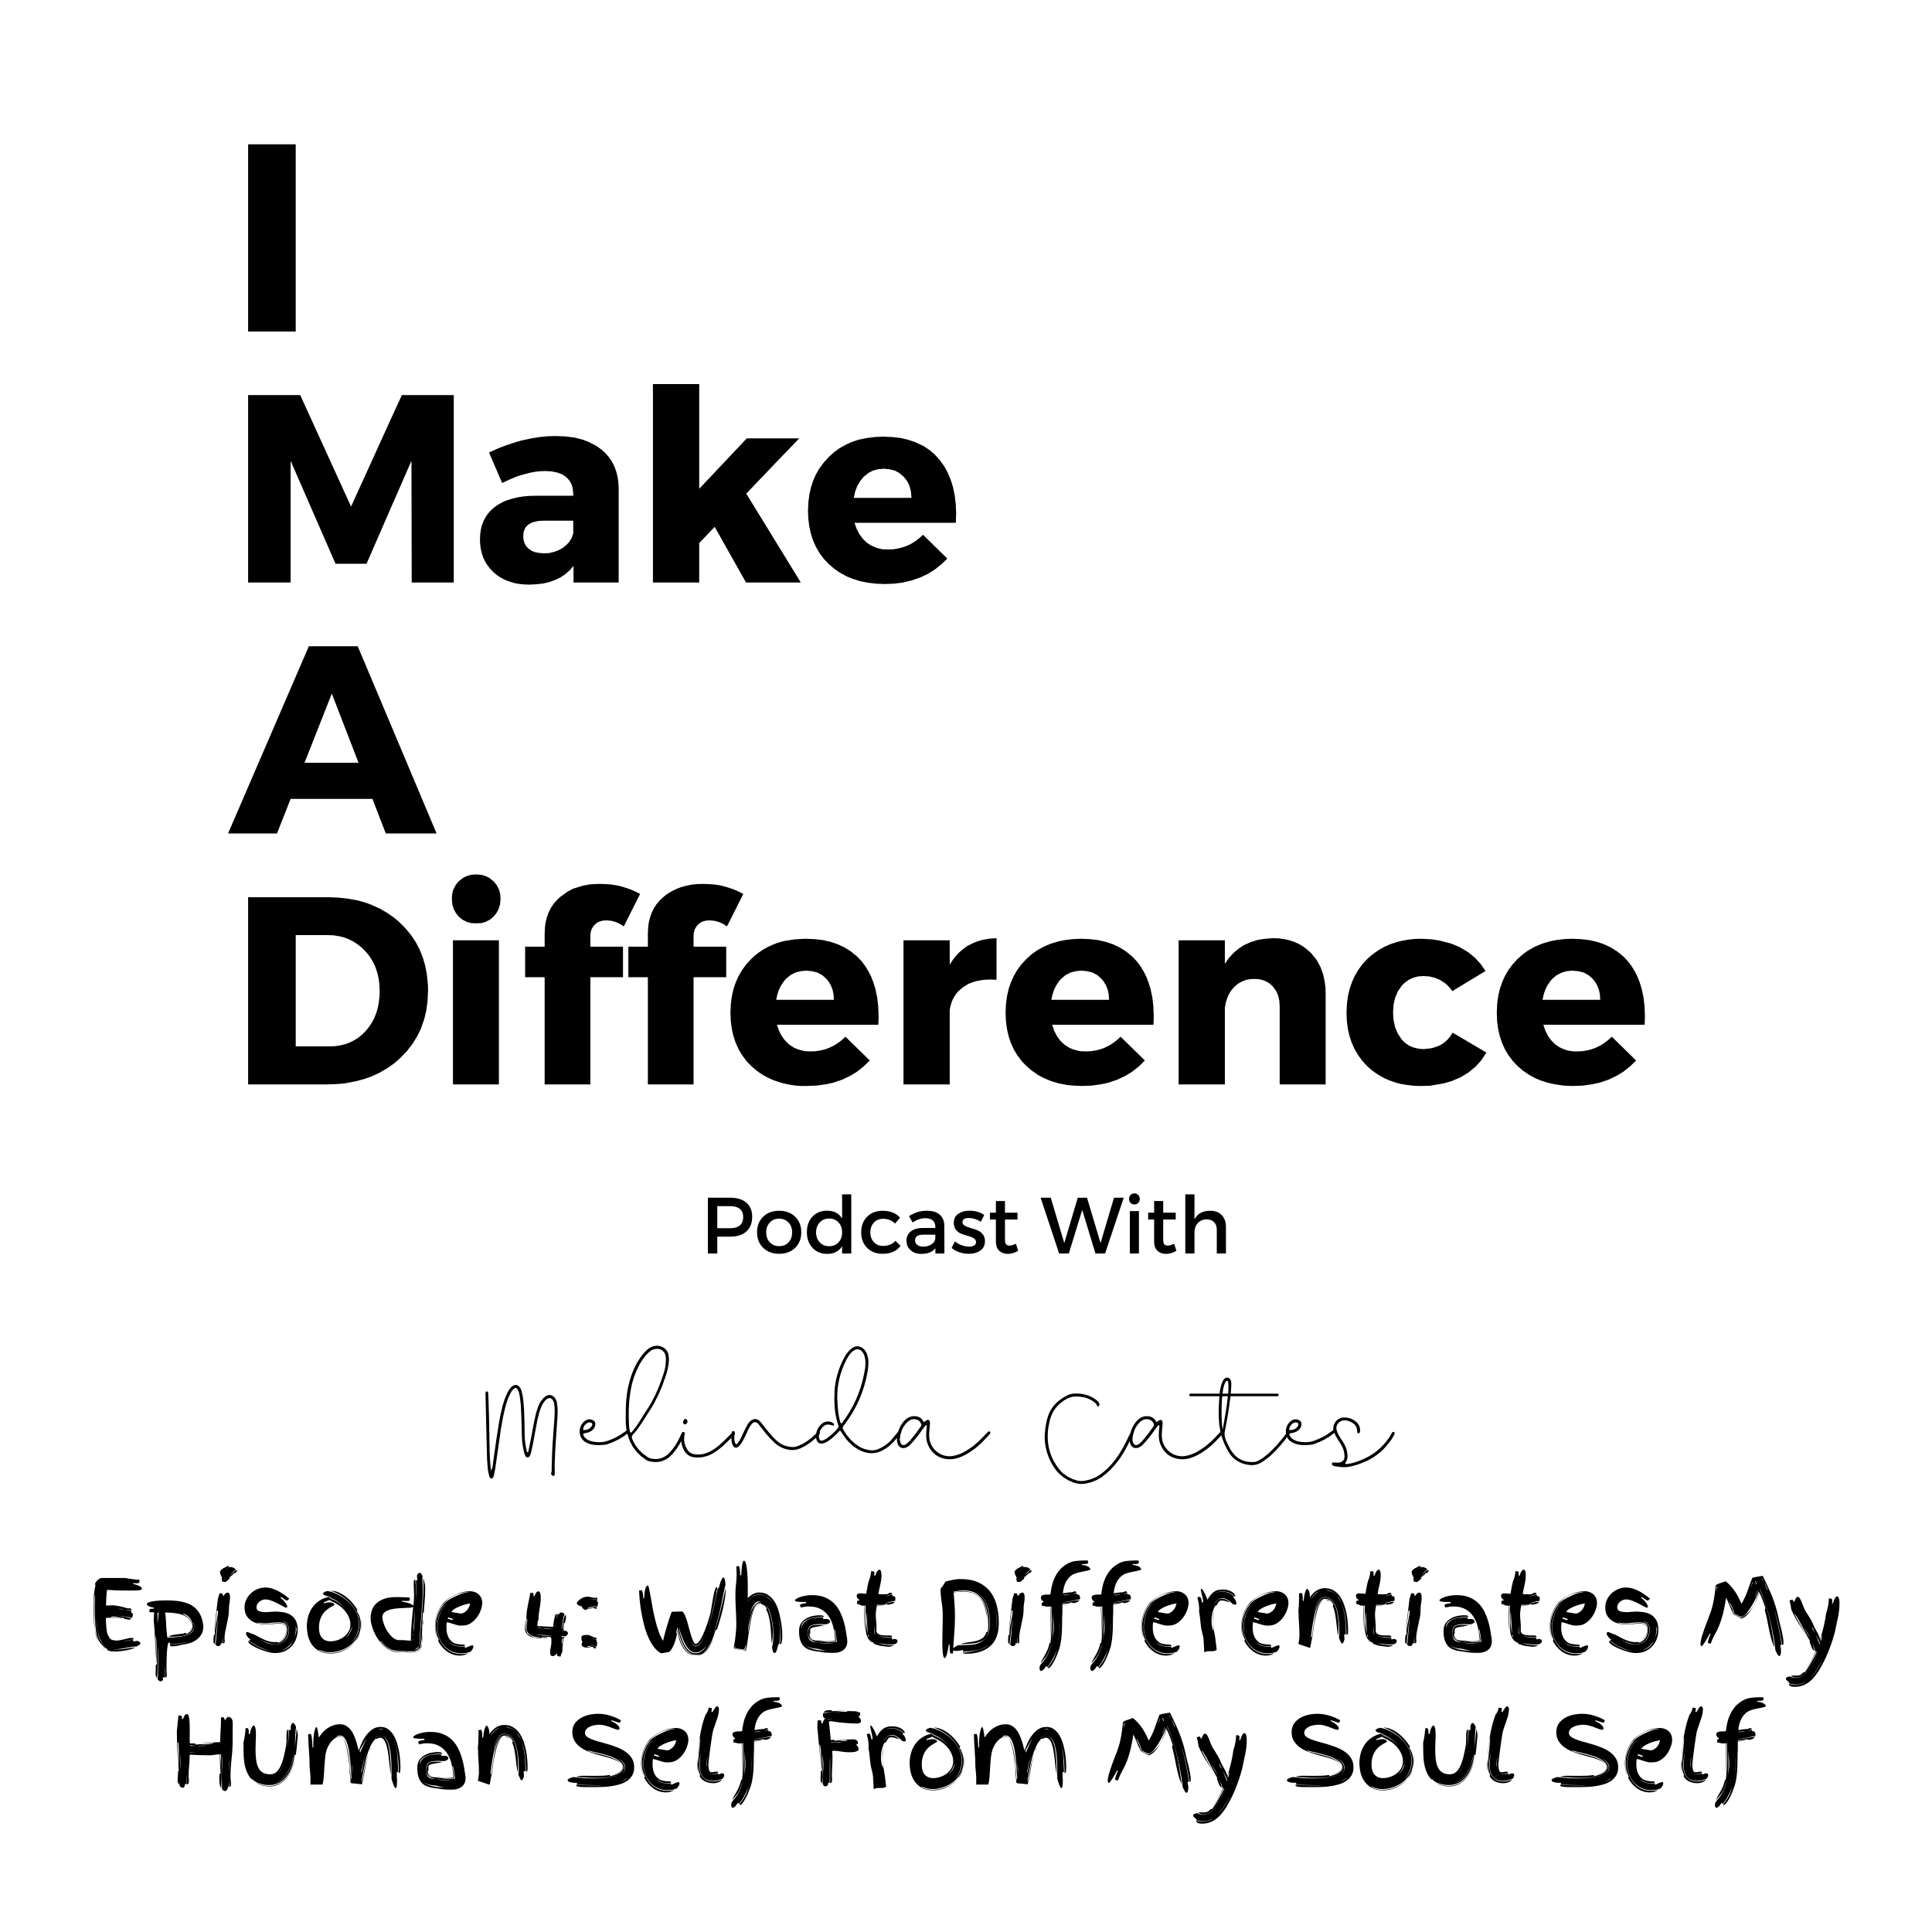 Episode 4: What Differentiates My Human Self From My Soul Self